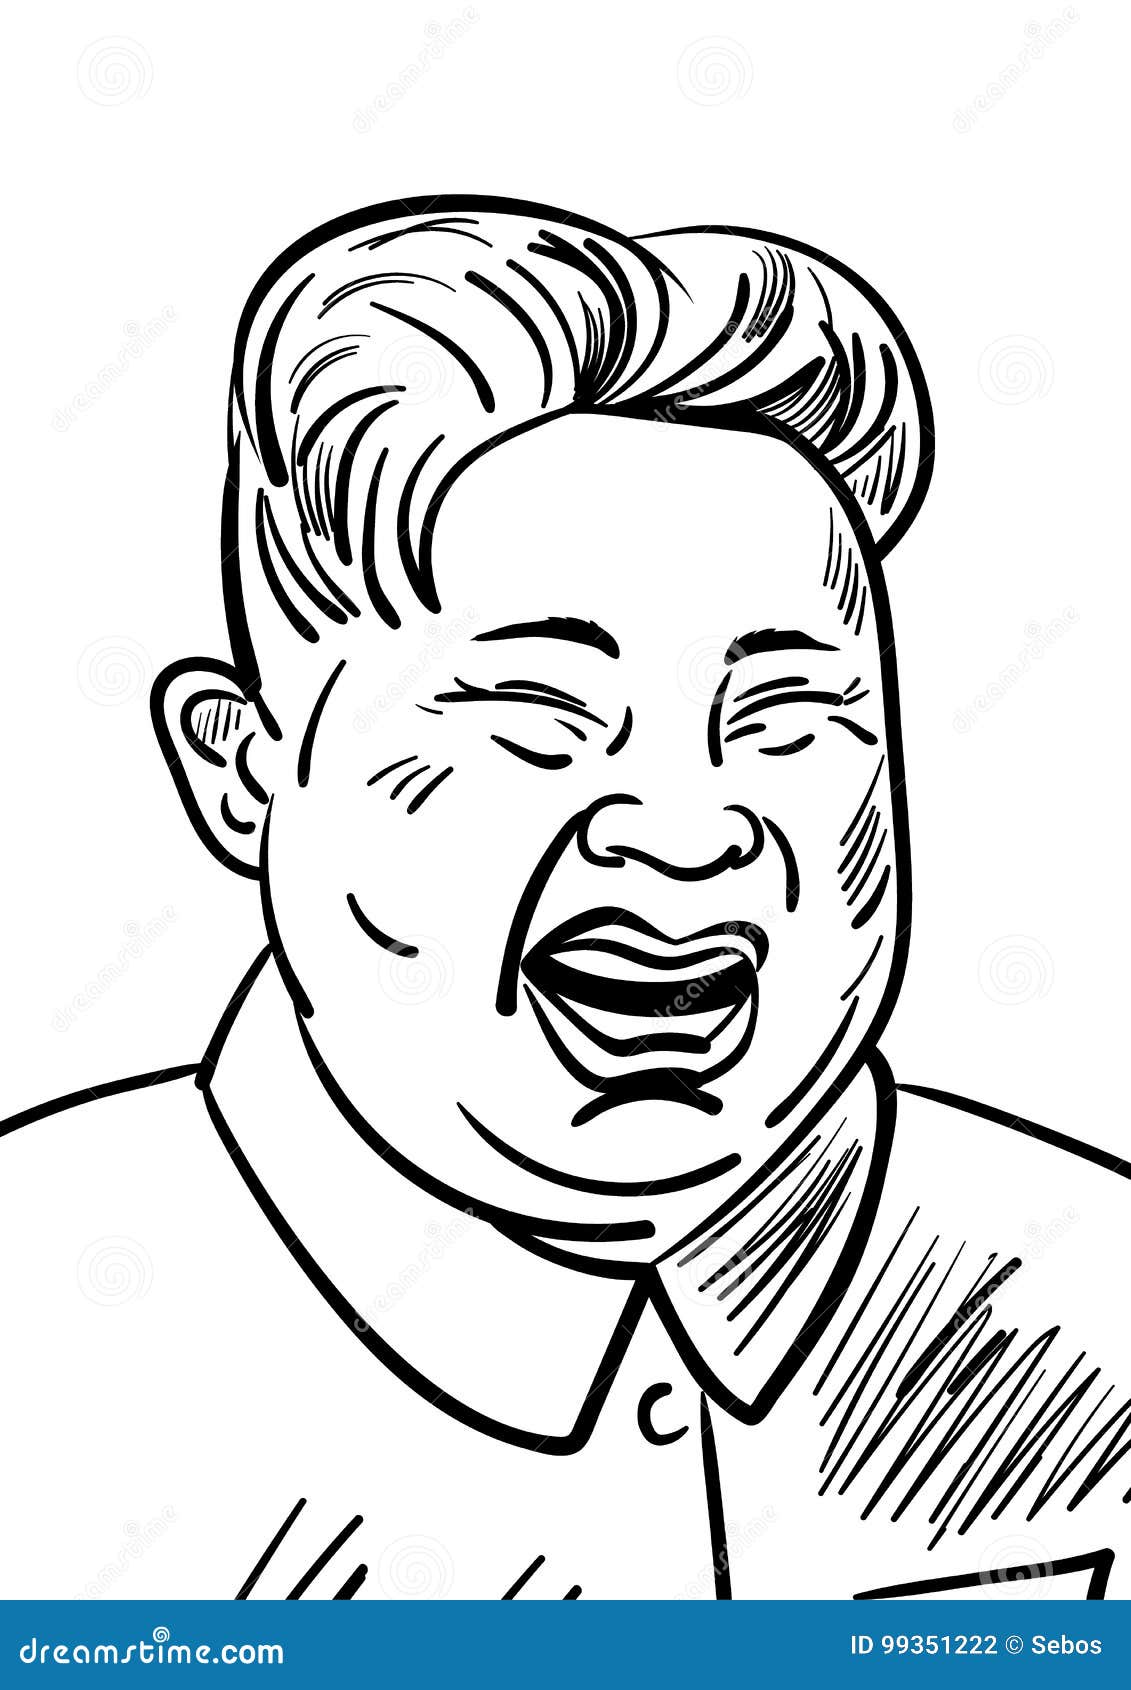 September 06, 2017: Hand Drawn Portrait of the Smilling Leader of North